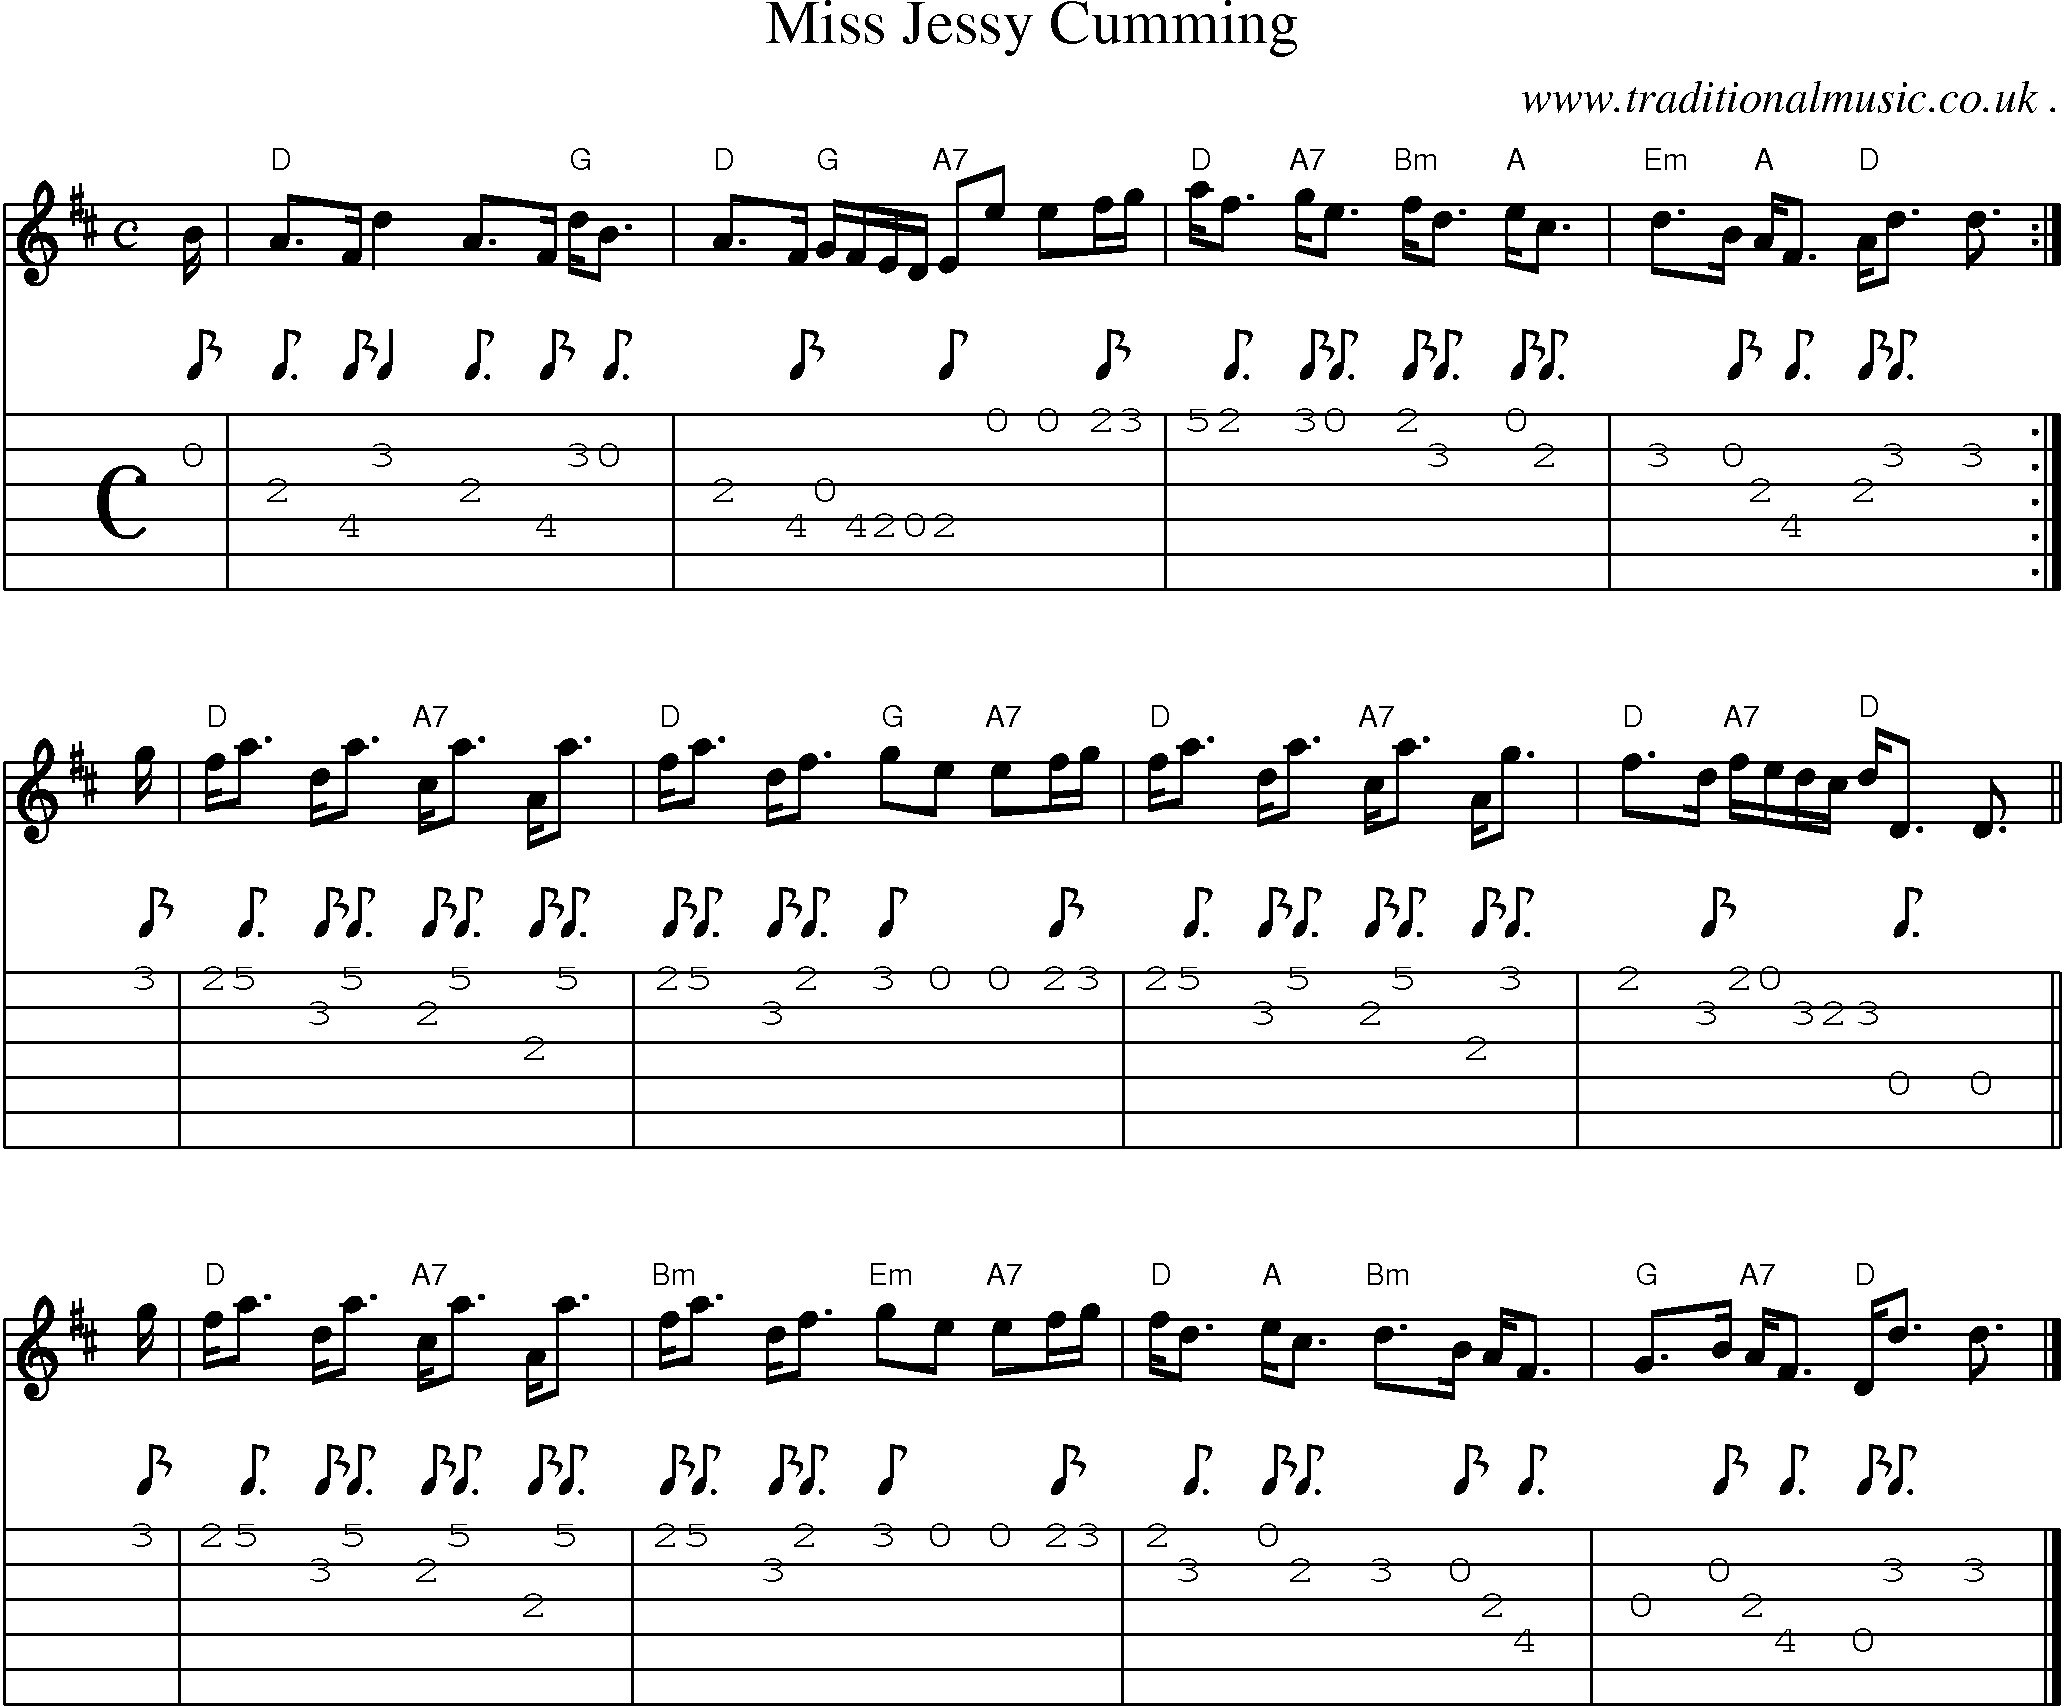 Sheet-music  score, Chords and Guitar Tabs for Miss Jessy Cumming